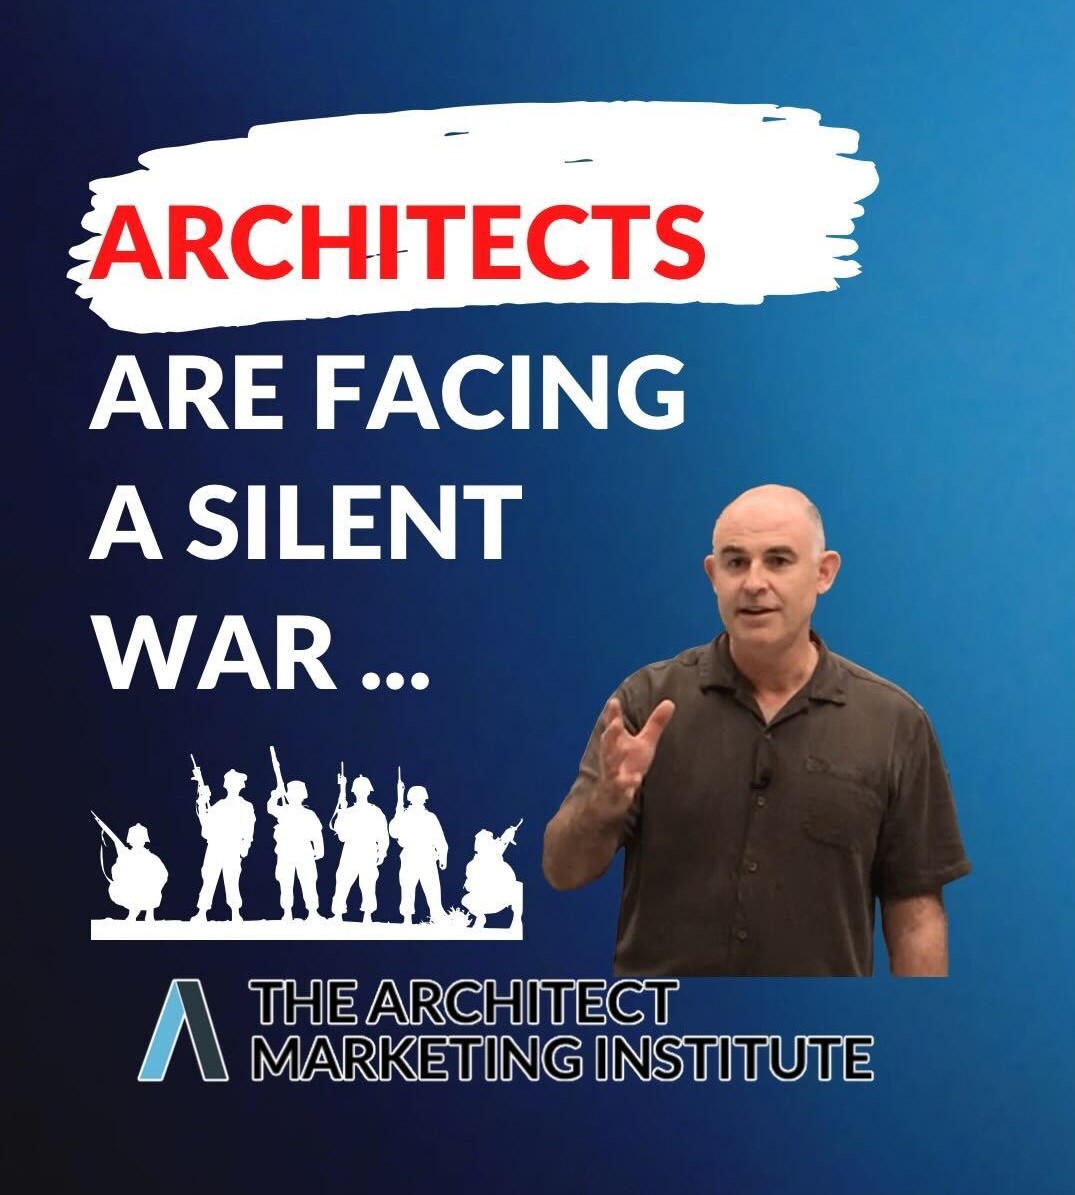 Architects Are Facing a Silent War - Richard Petrie's most controversial blog post - Architect Marketing Institute's co-founder